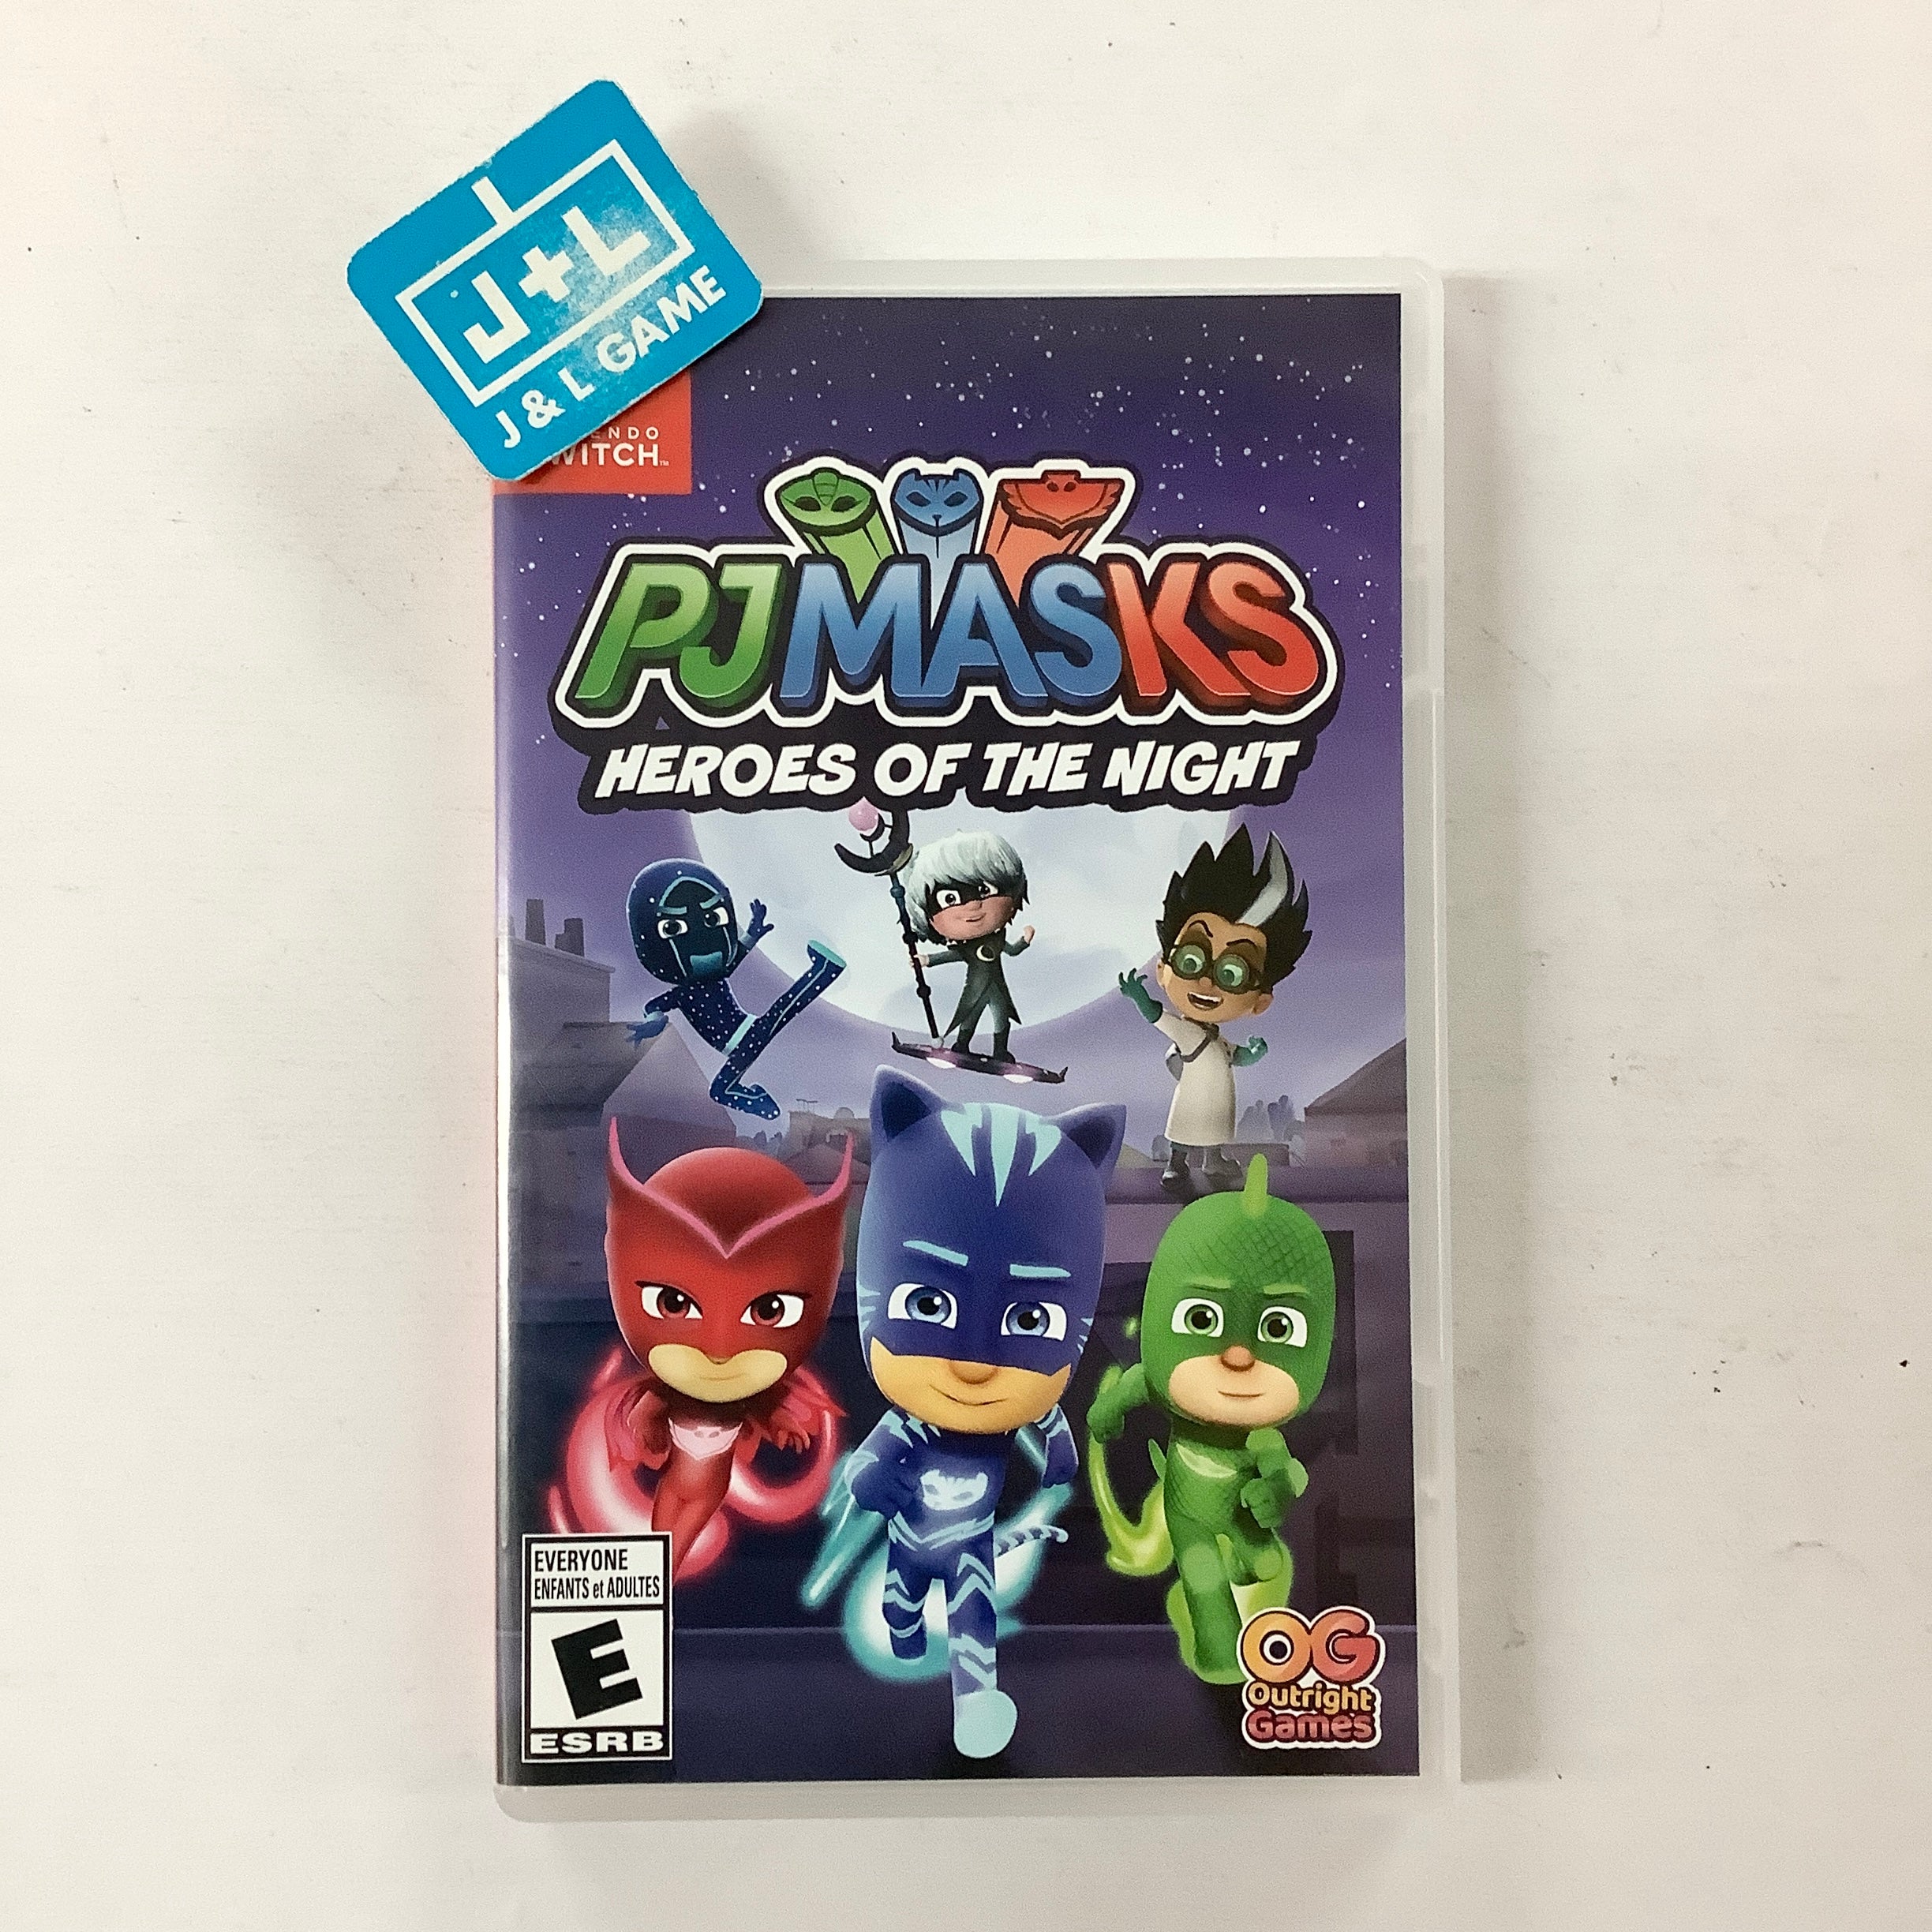 PJ Masks: Heroes of The Night - (NSW) Nintendo Switch [UNBOXING] Video Games Outright Games   